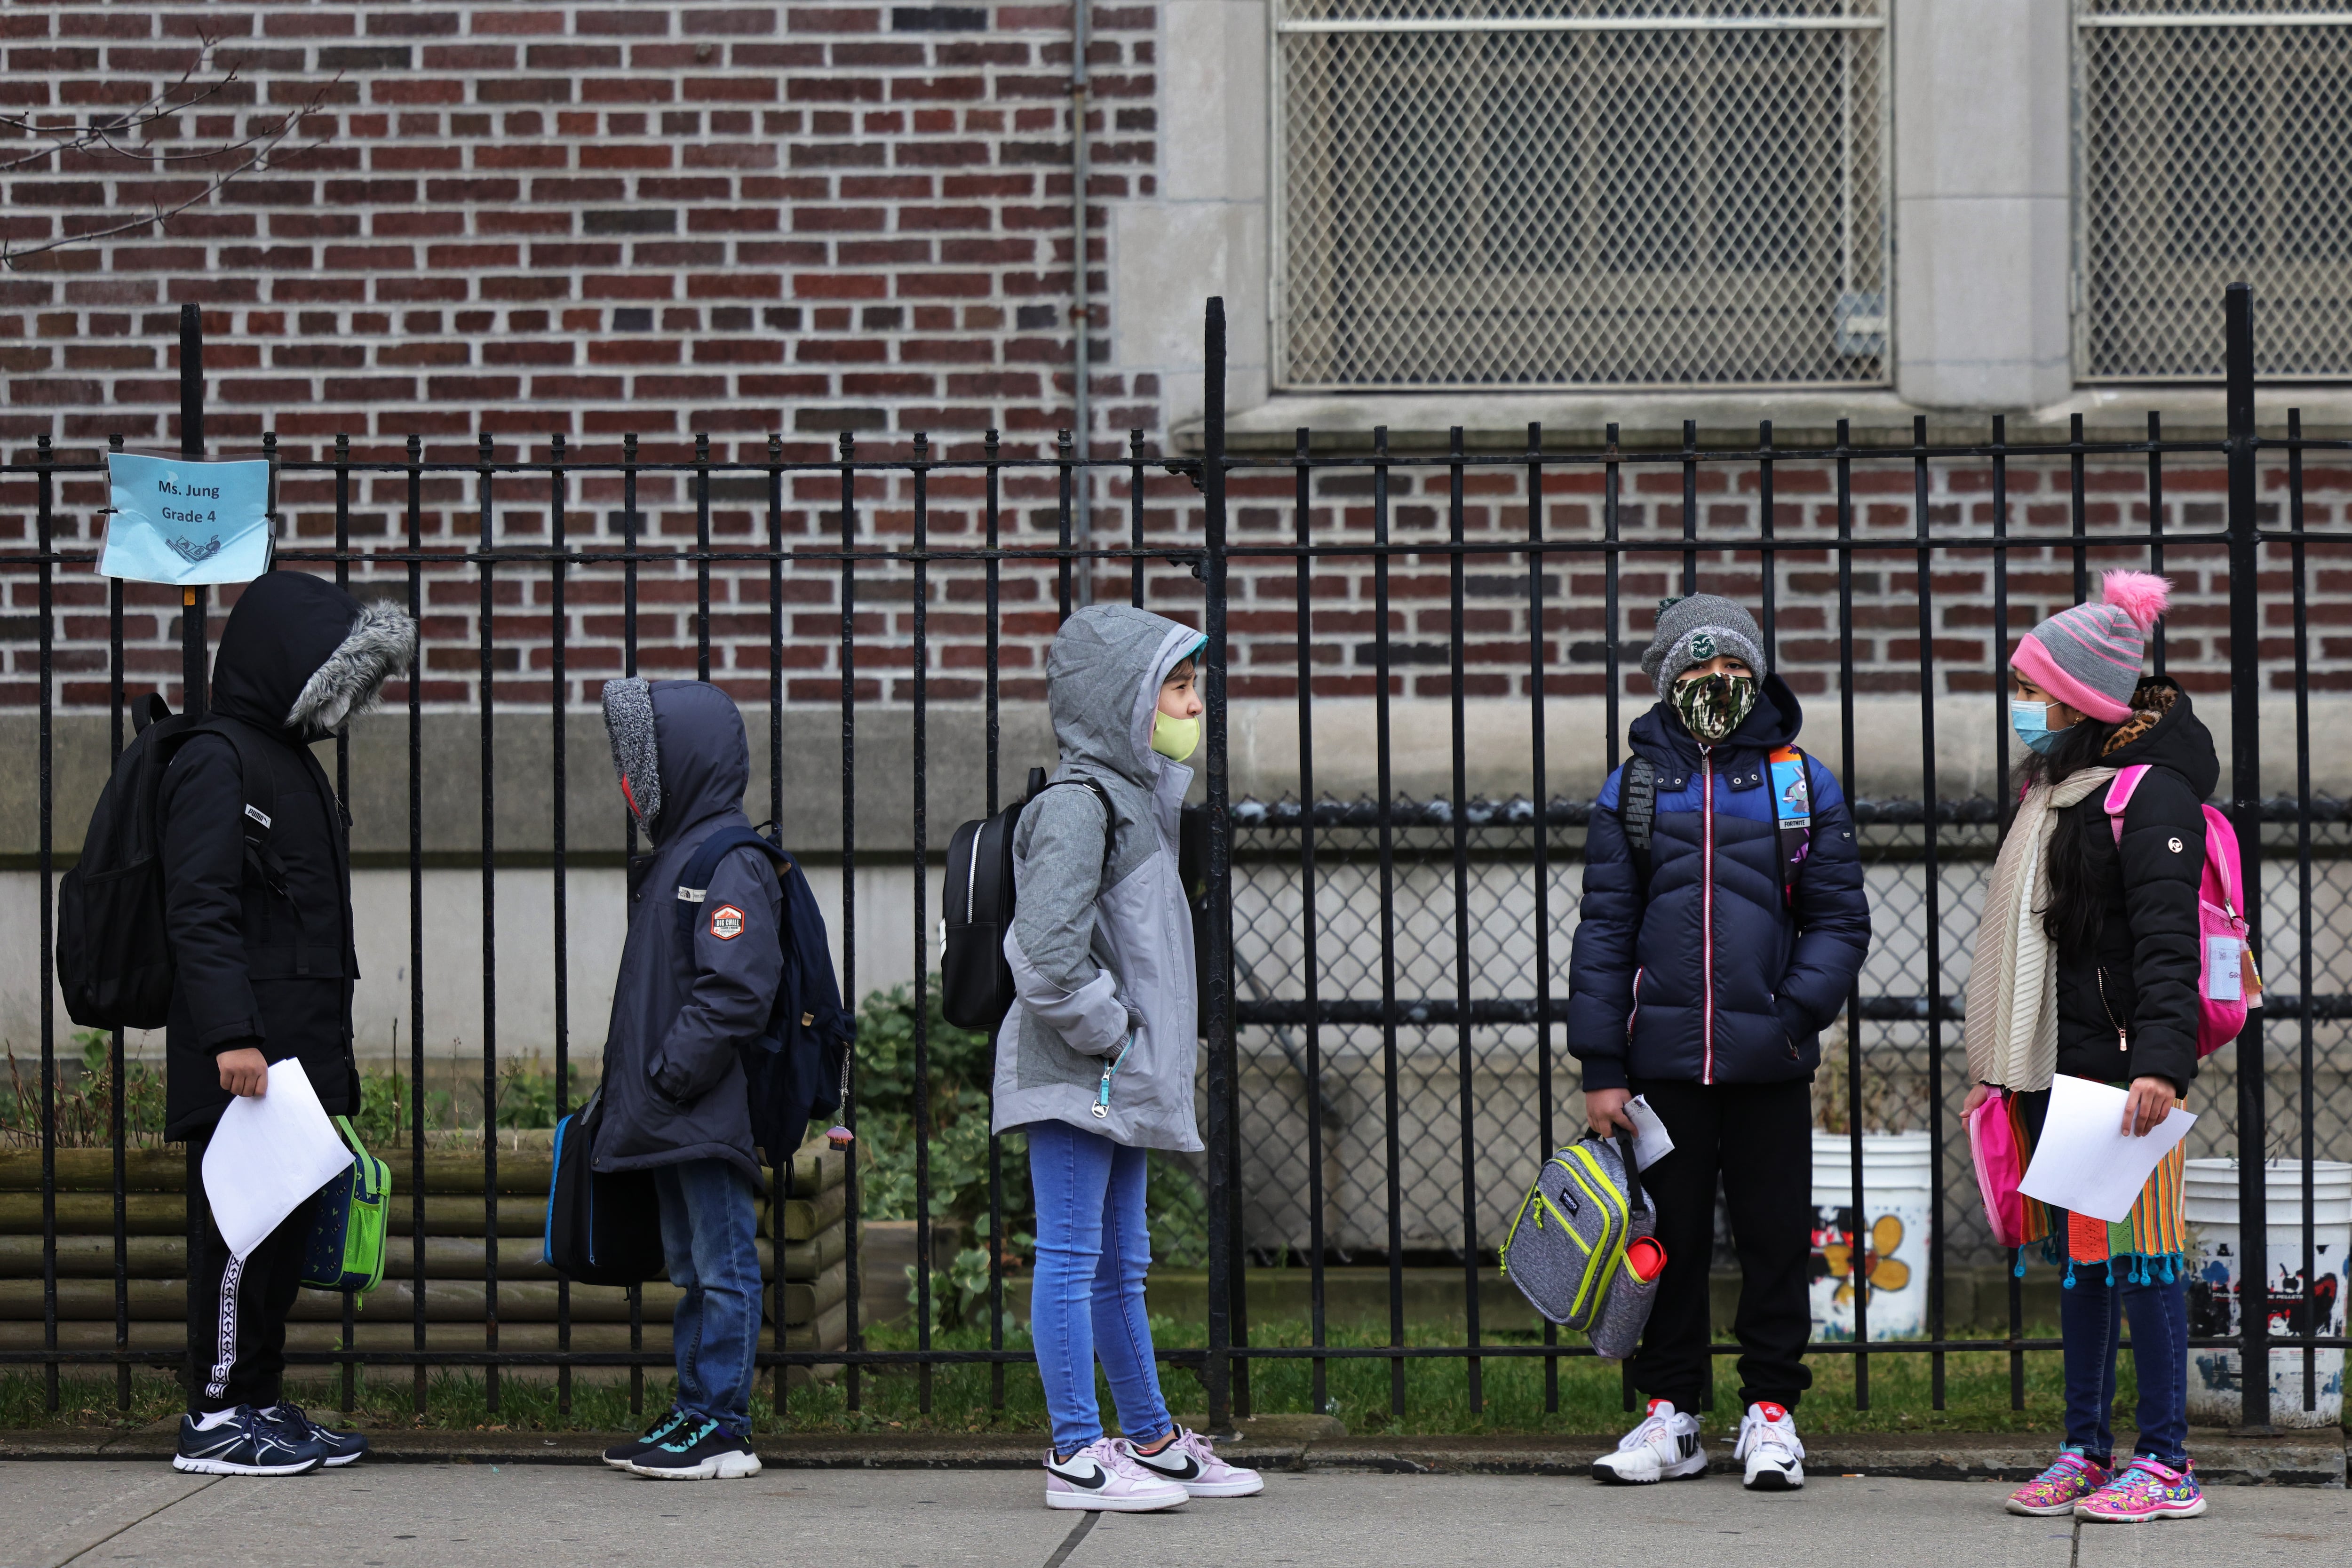 Elementary school students return to in-person school in New York City on Dec. 7, 2020.